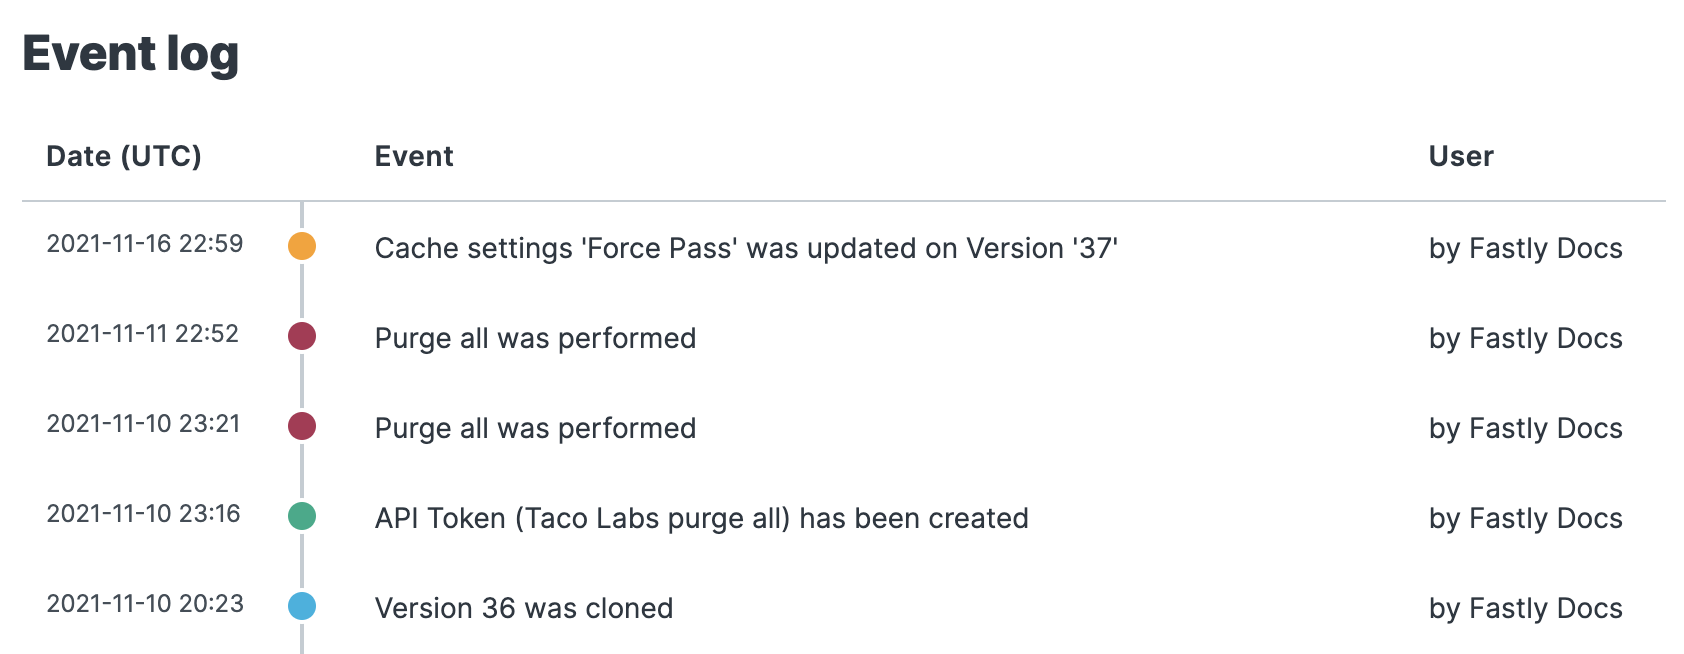 Reviewing the event log in the Fastly web interface